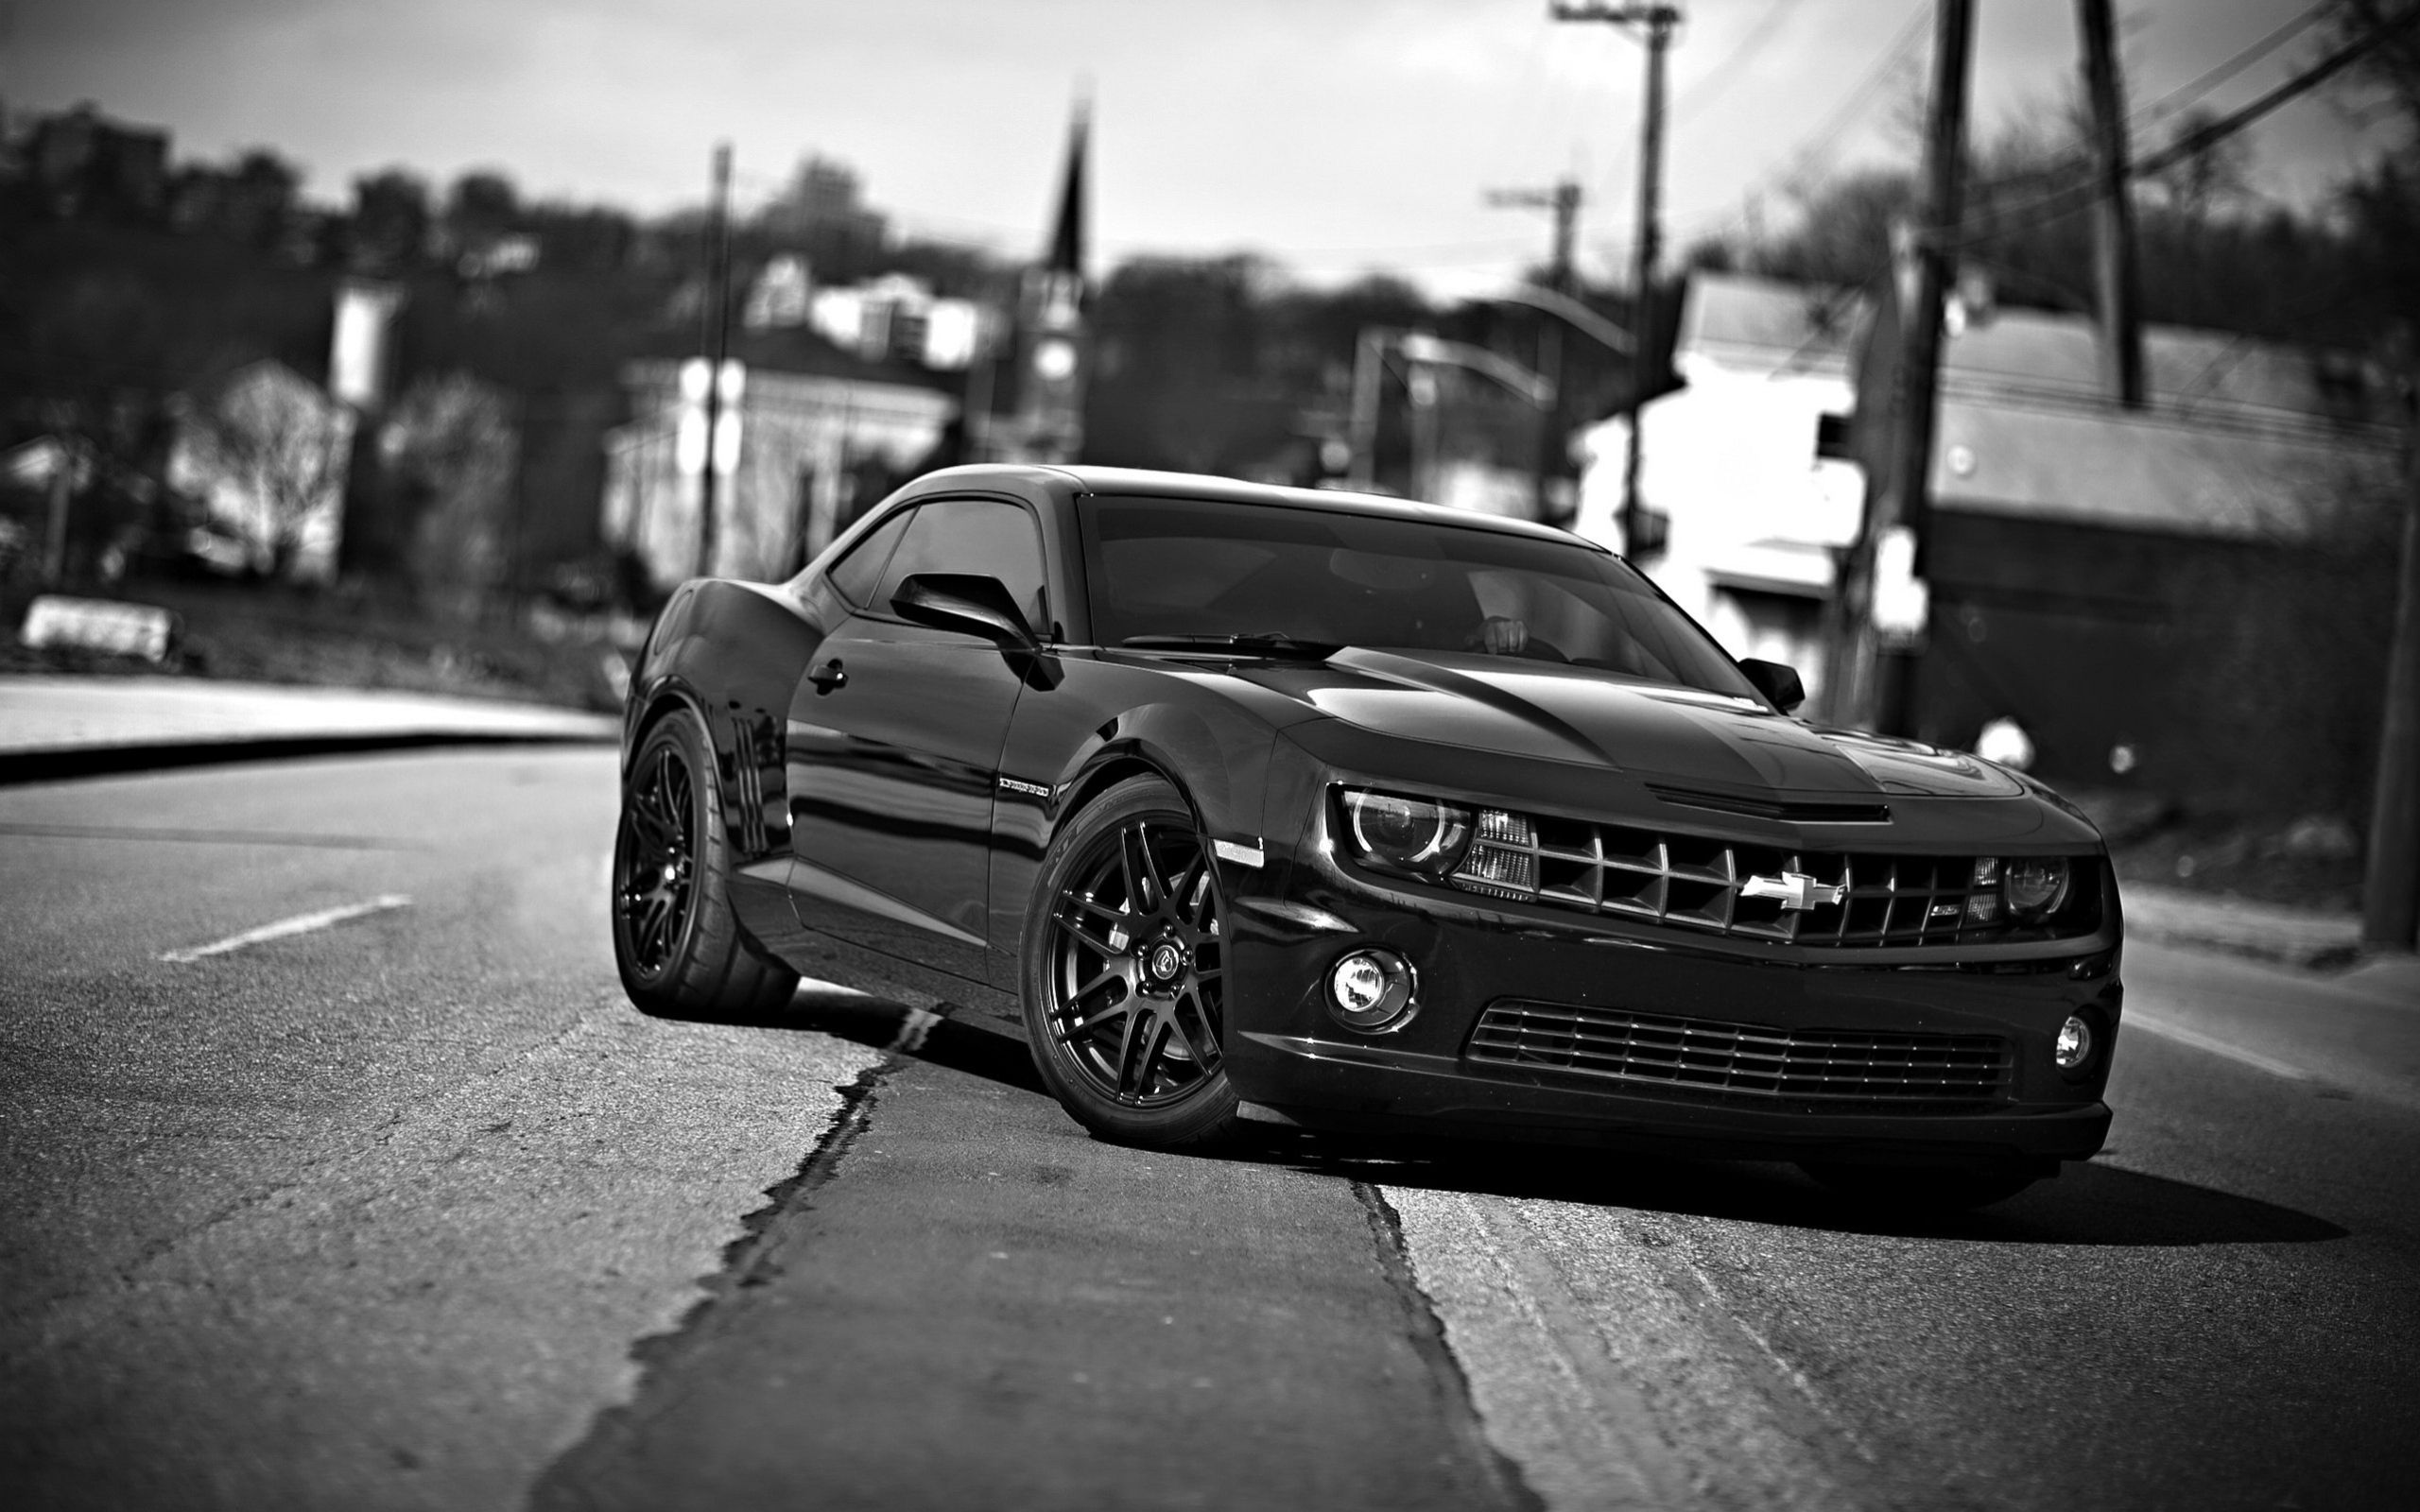 Free HD chevrolet camaro, auto, front view, cars, chb, chevrolet, bw